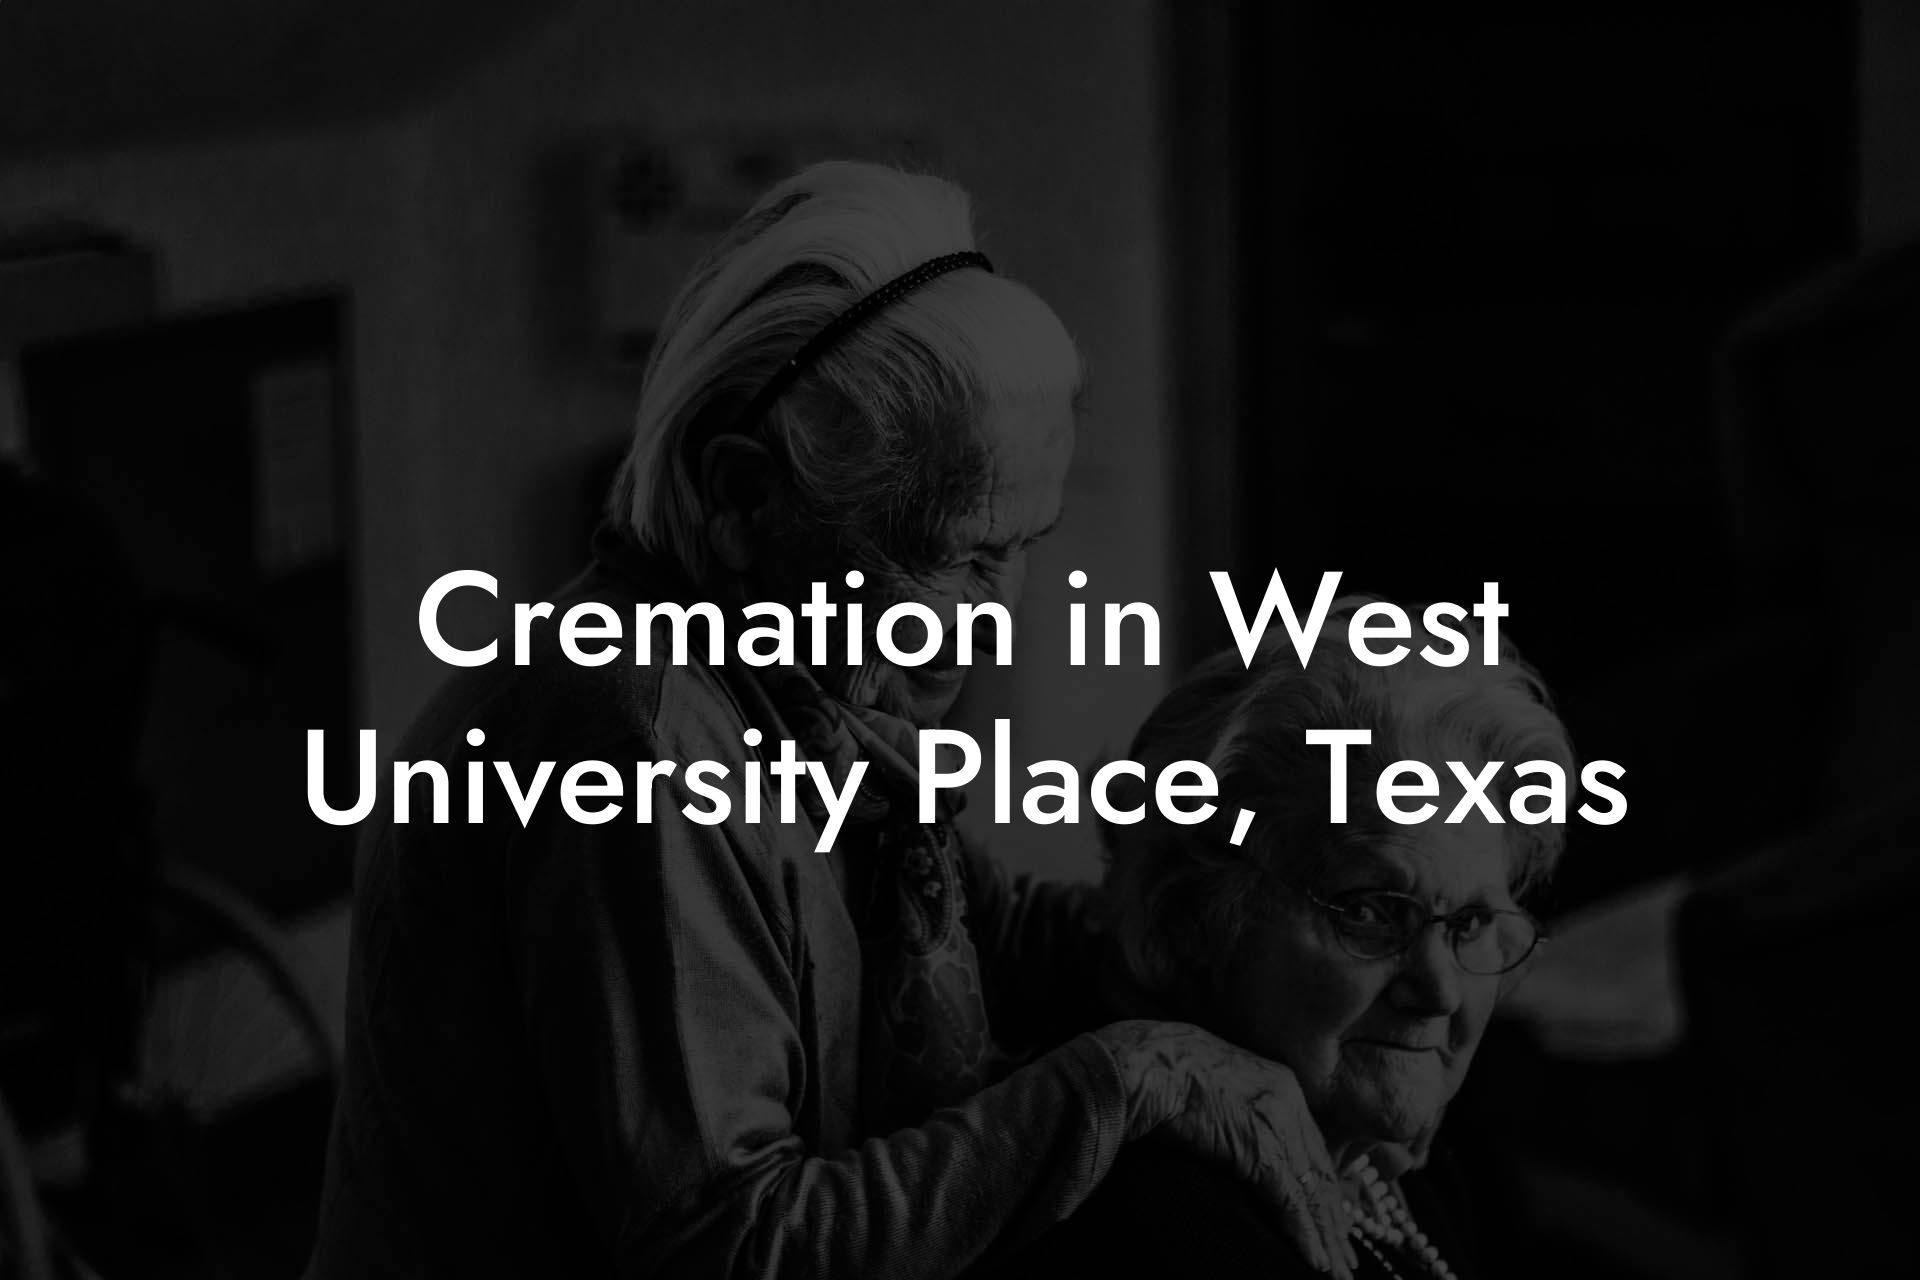 Cremation in West University Place, Texas